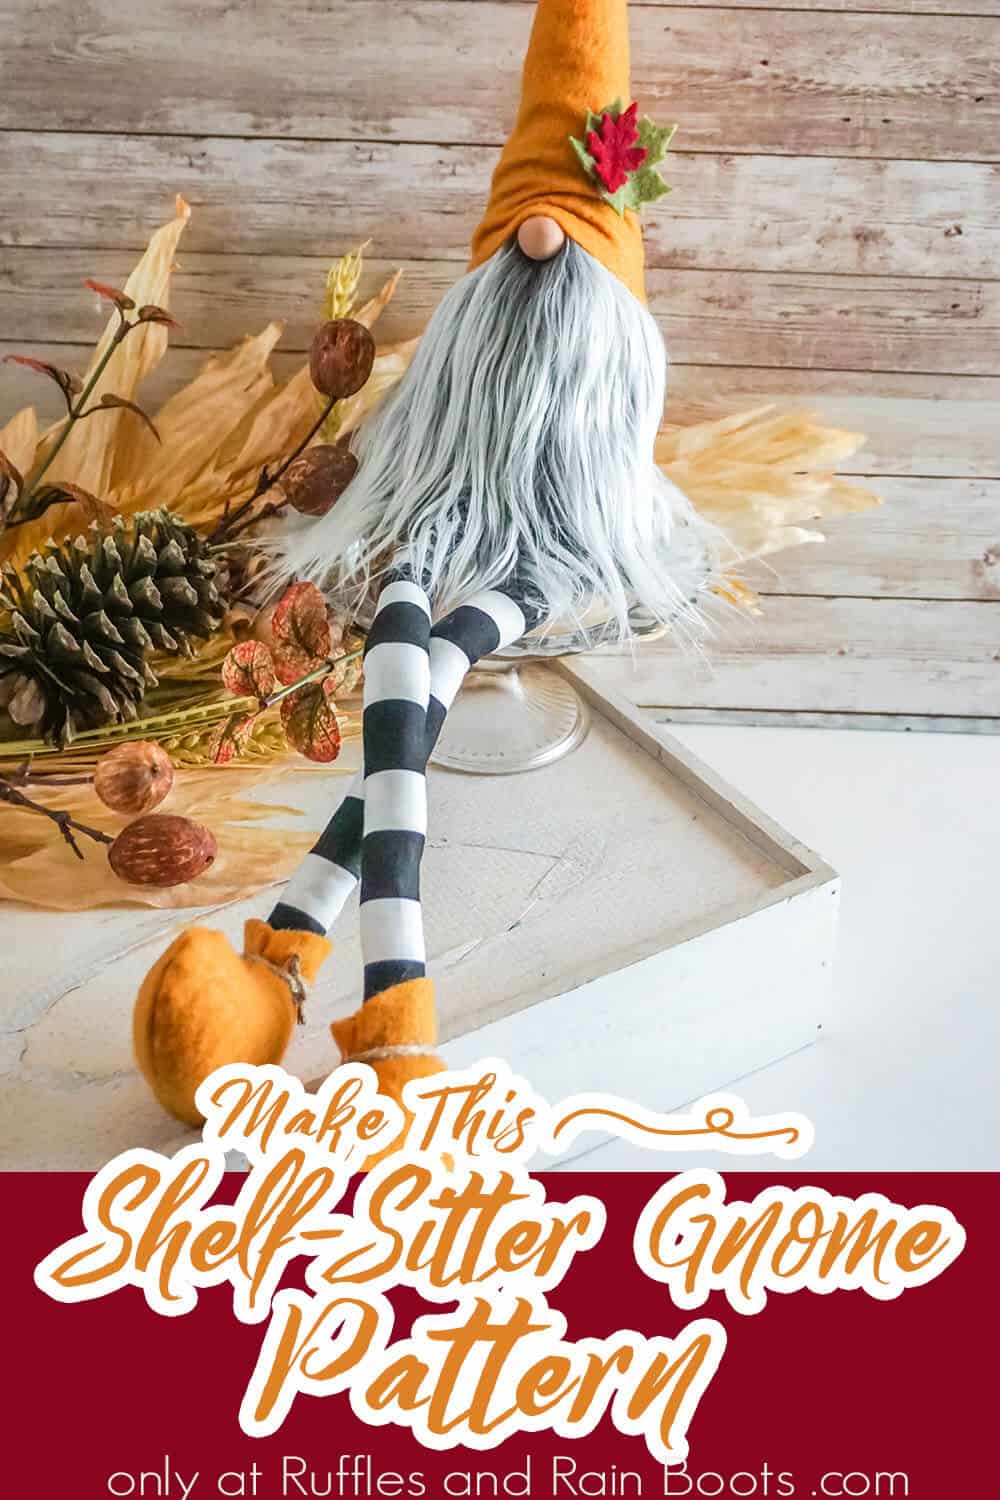 gnome pattern for fall with text which reads make this shelf sitter gnome pattern